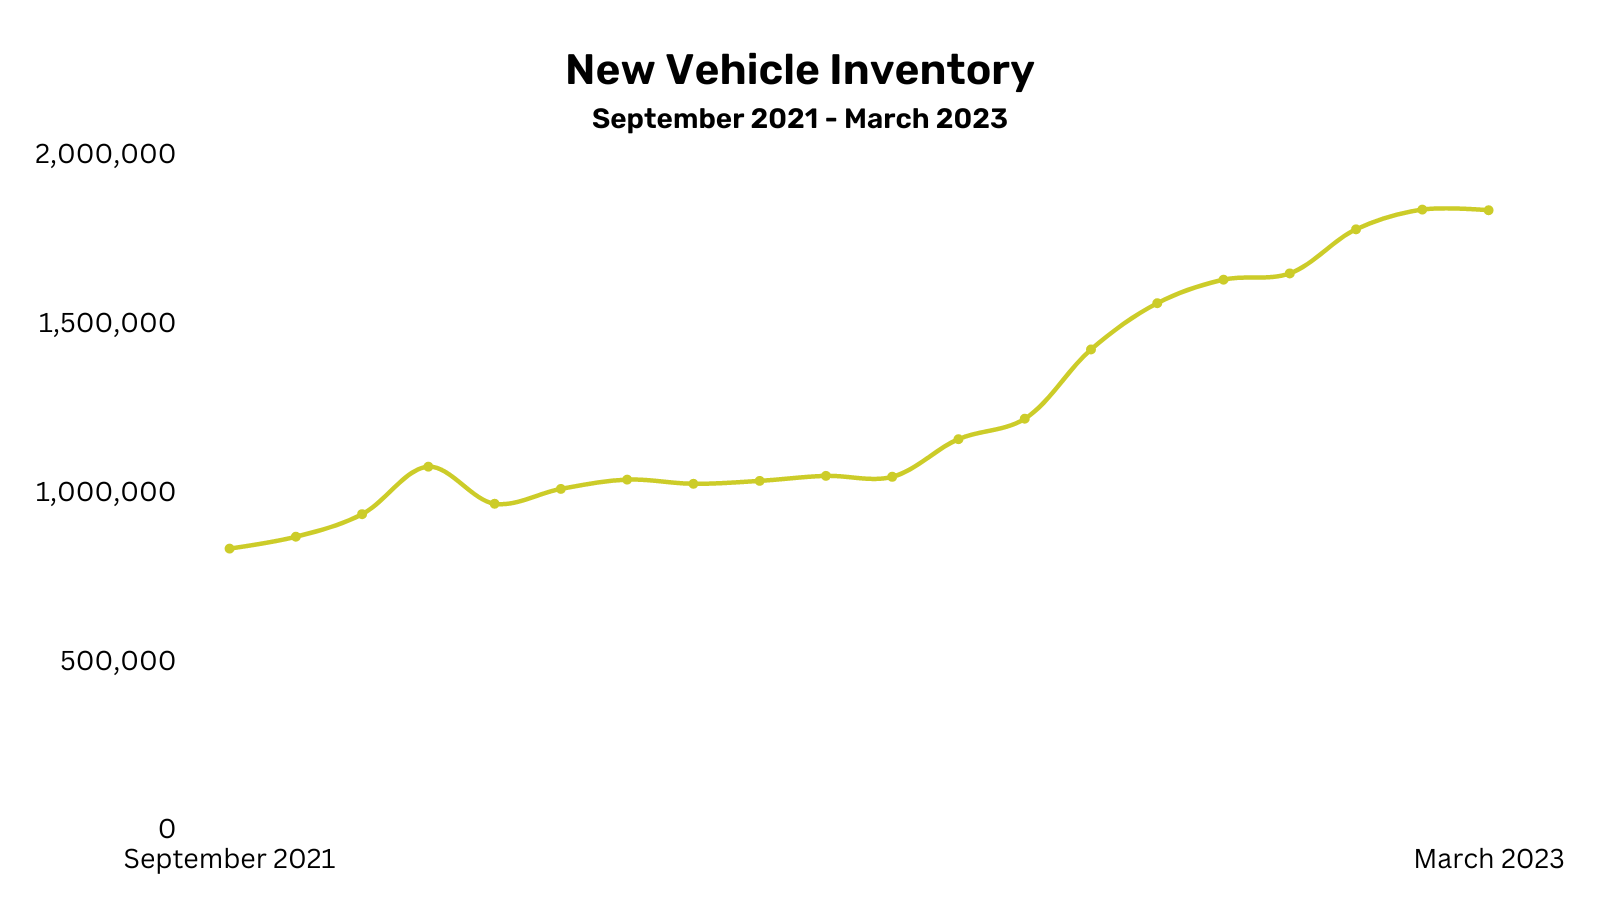 New Vehicle Inventory September 2021 - March 2023